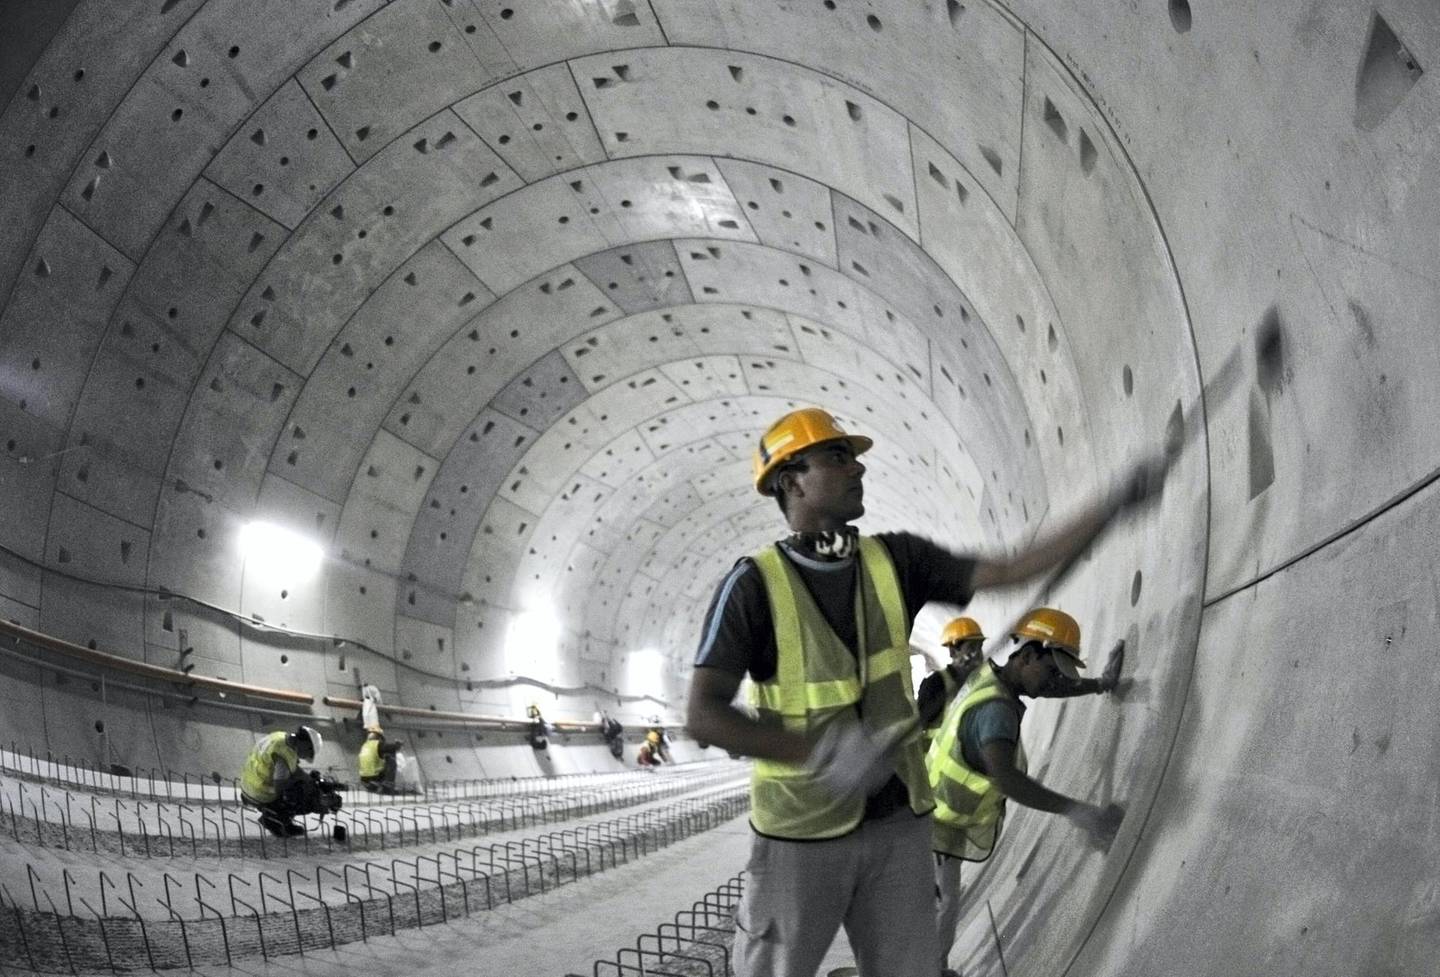 Labourers work in the underground tunnel of Union Square Station, one of two underground stations where both lines meet at Metro Dubai, currently under construction, May 28, 2008. The driverless and fully automated metro network is scheduled for completion in 2009, and will be the longest fully automated rail system in the world, consisting of 47 stations in total, ten of which will be underground. REUTERS/Jumana El Heloueh (UNITED ARAB EMIRATES)